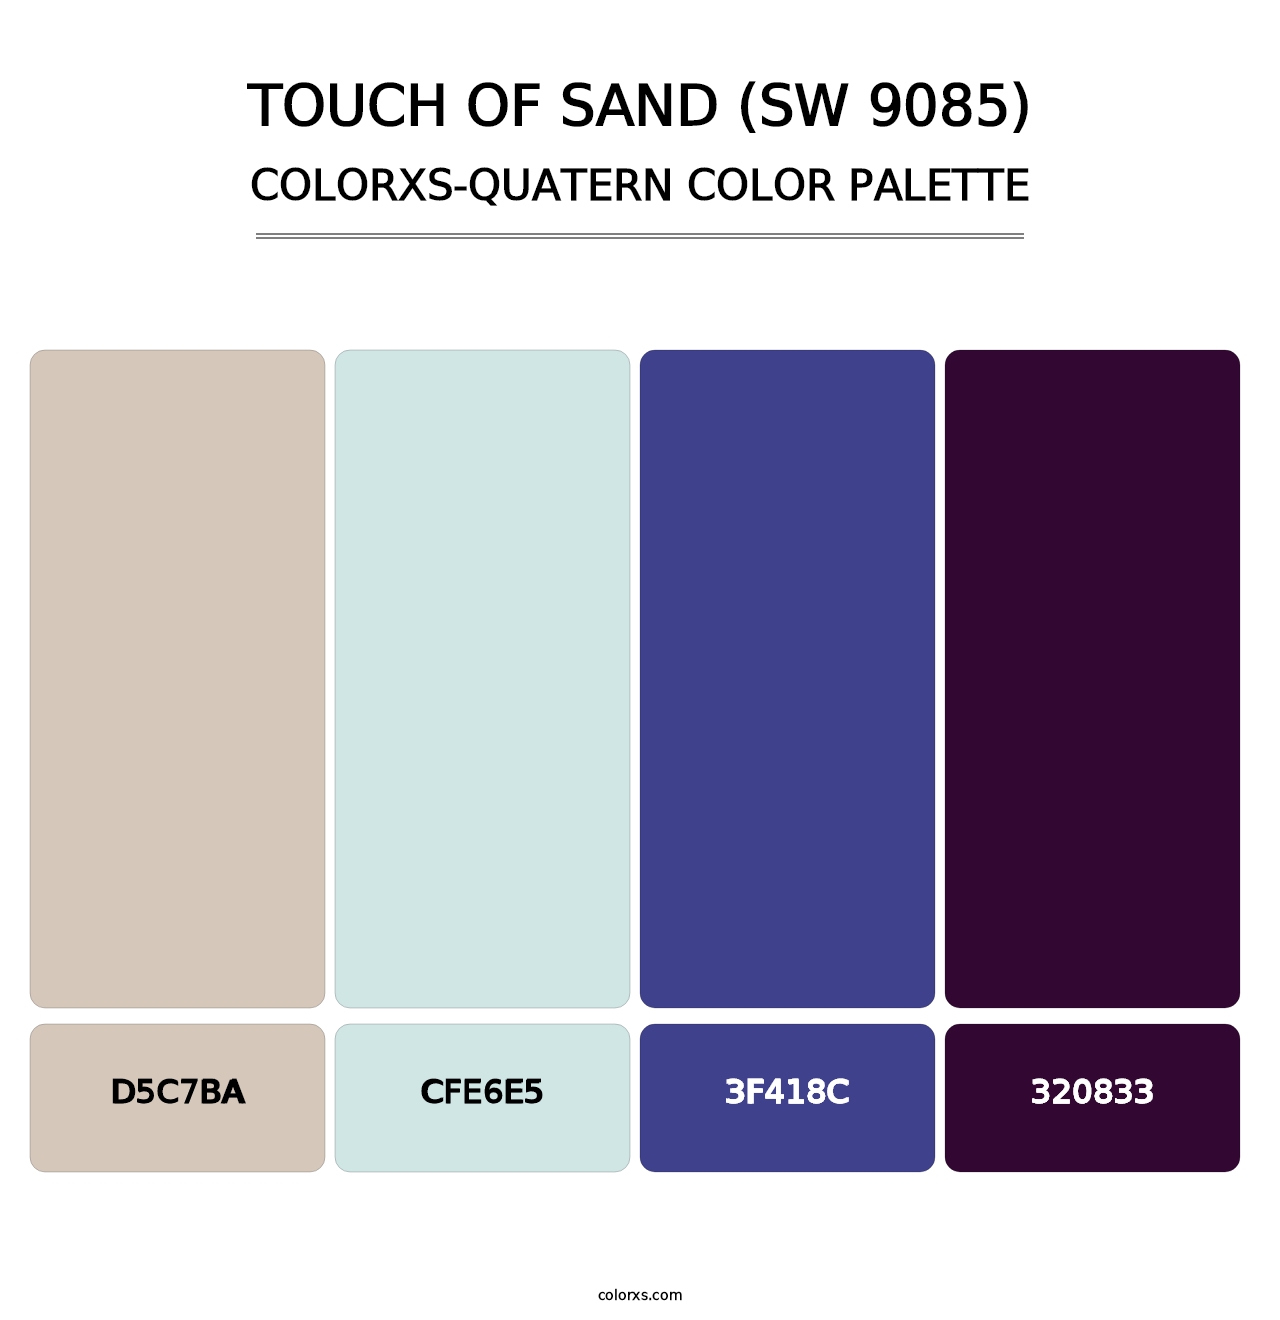 Touch of Sand (SW 9085) - Colorxs Quatern Palette